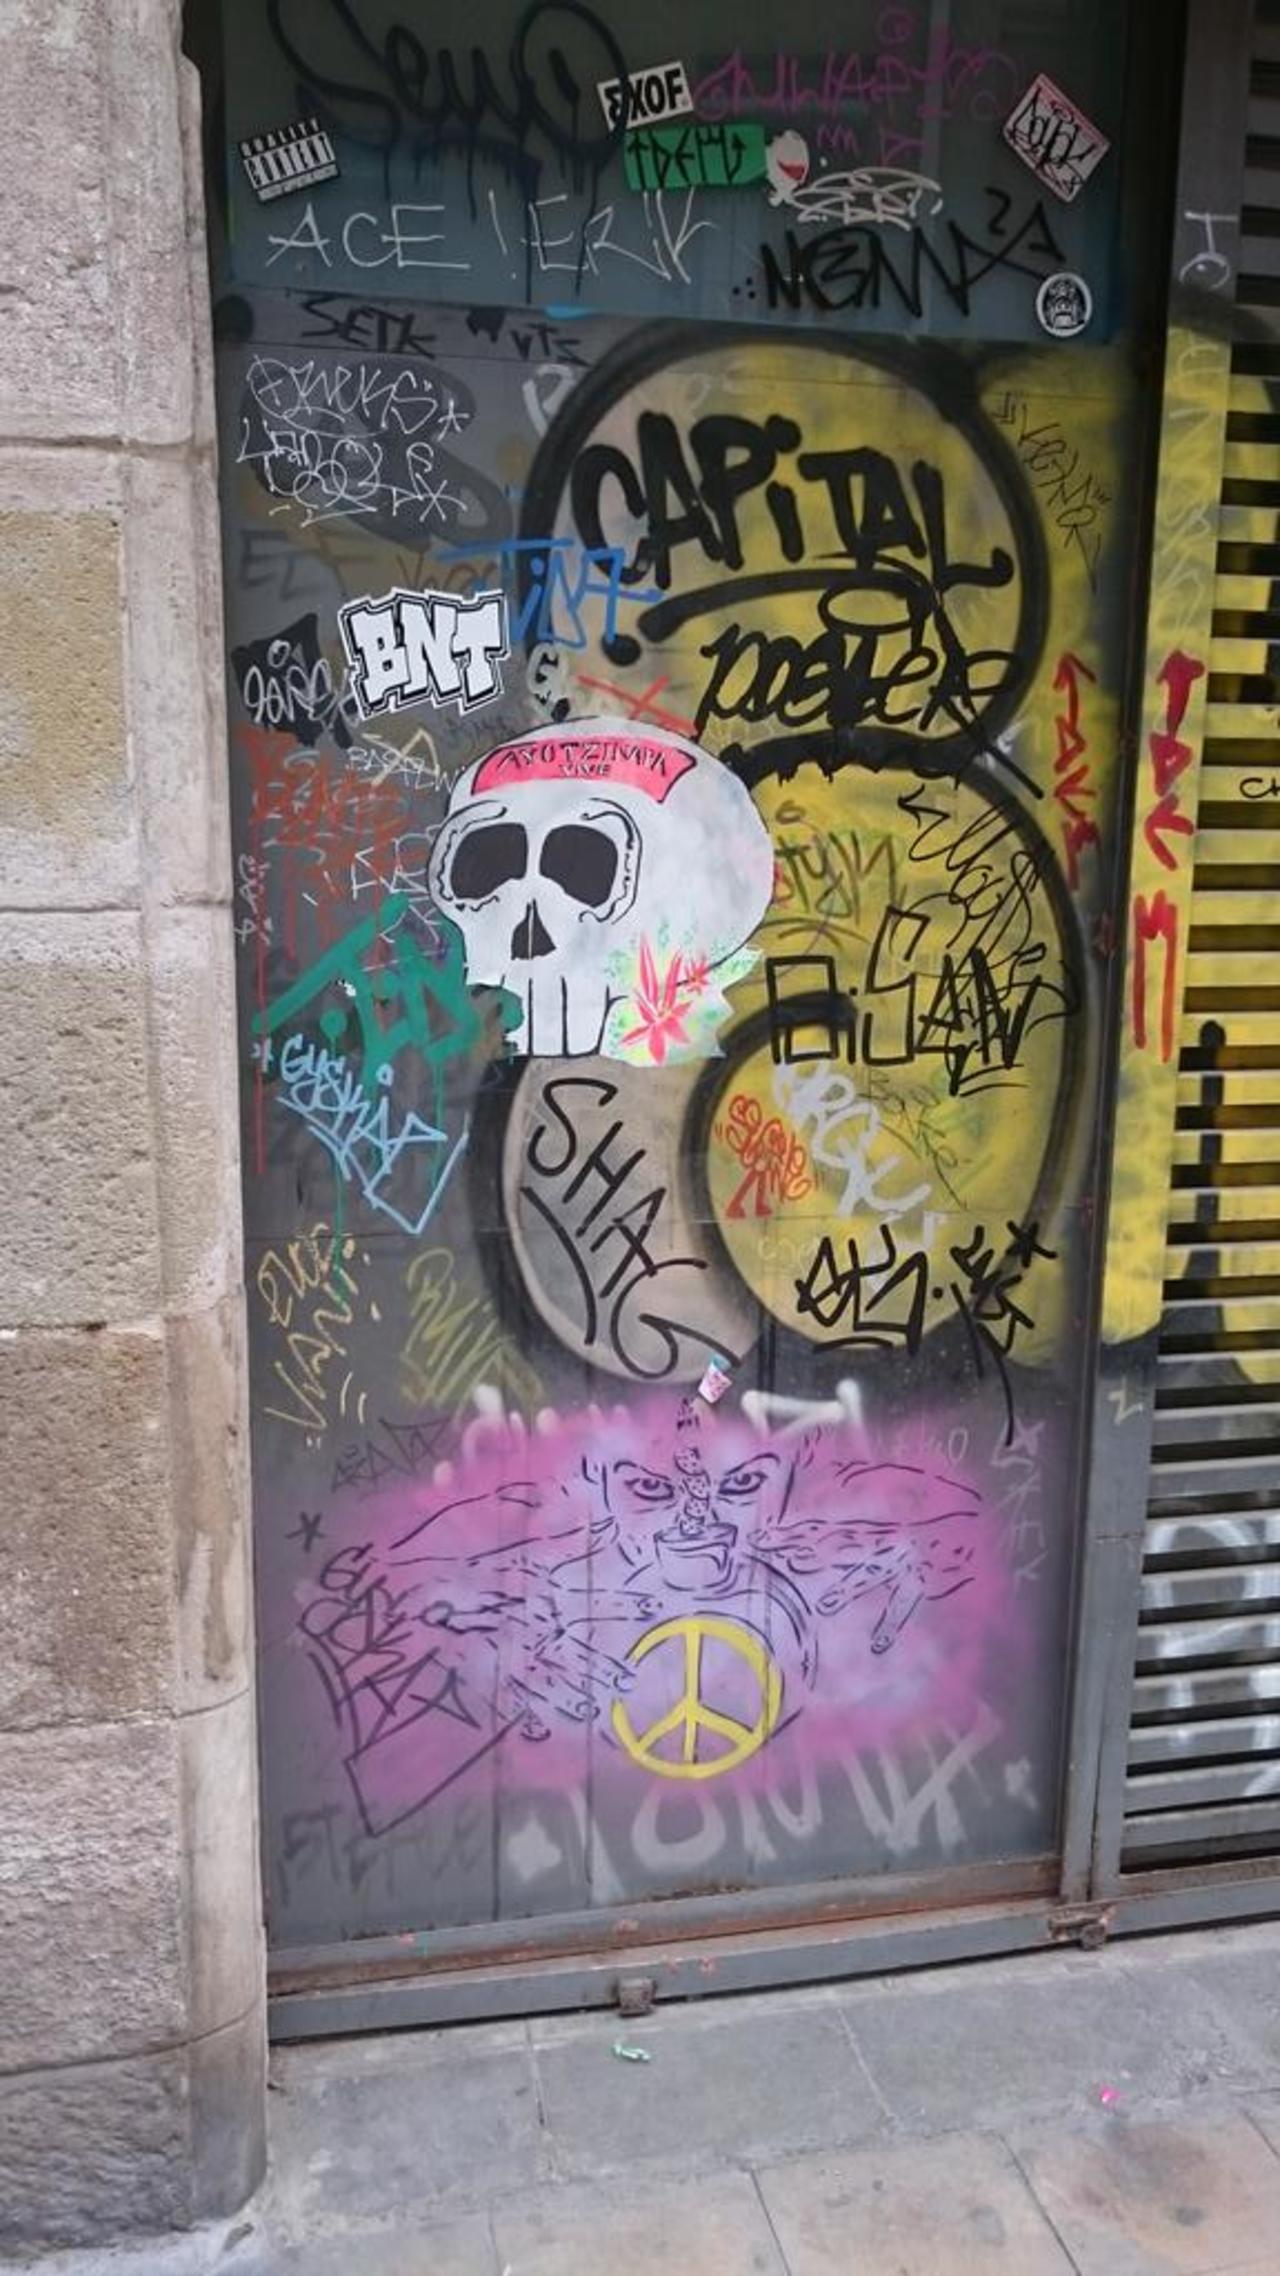 #BCN was full of the #urbanart people hate it. But I feel it gives part of the city character! #graffiti #streetart https://t.co/FFNLd89r14